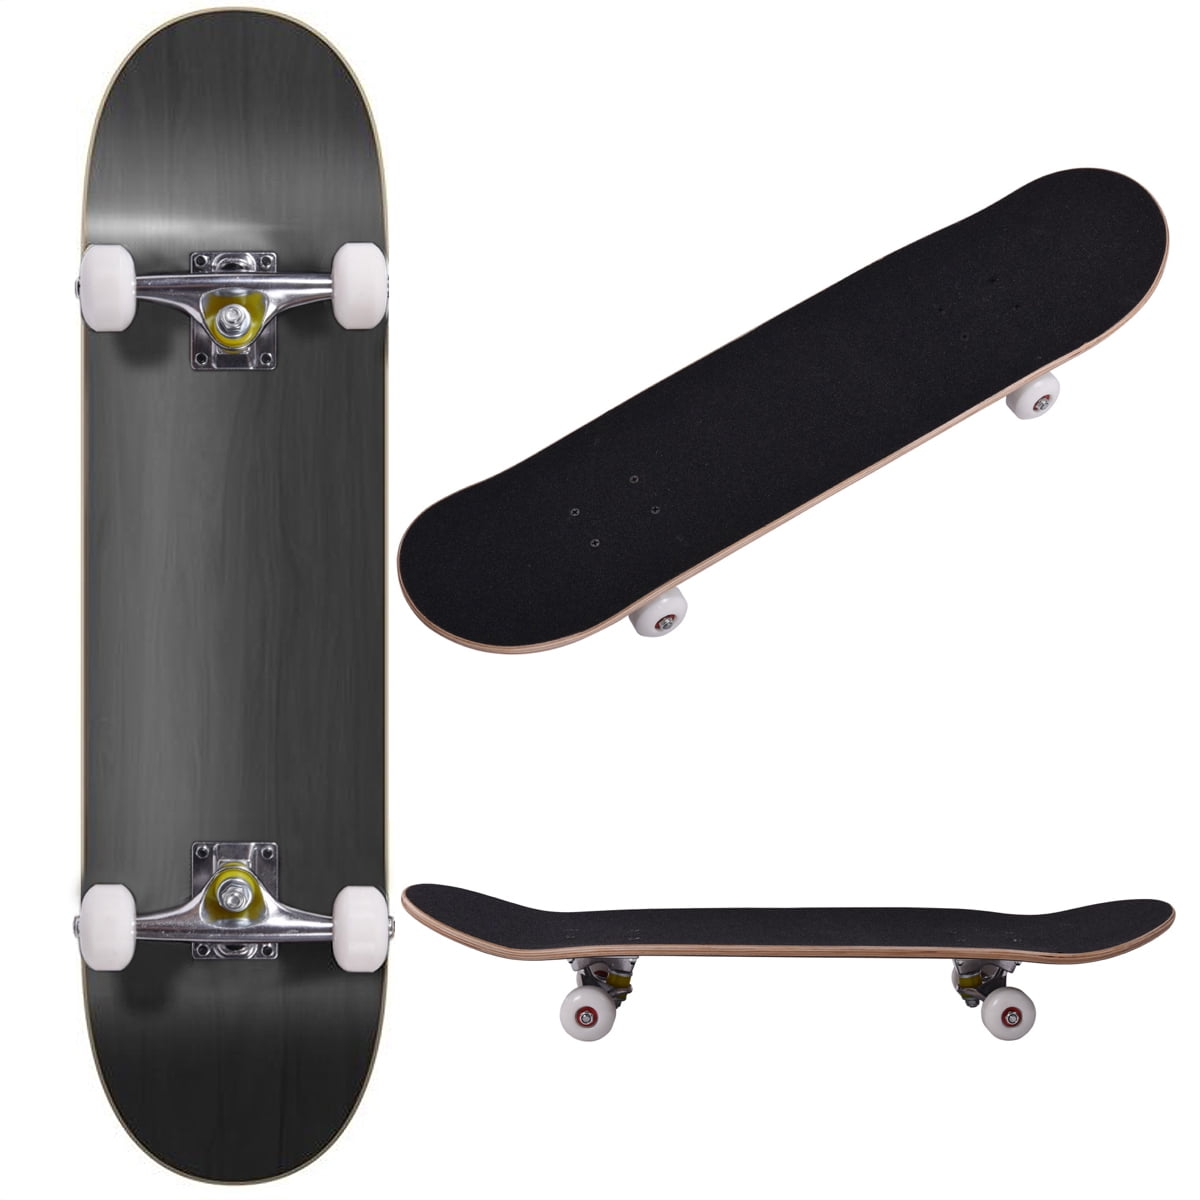 17Inches Blank Skateboard DIY Complete Natural with Black Trucks and Red Wheels 